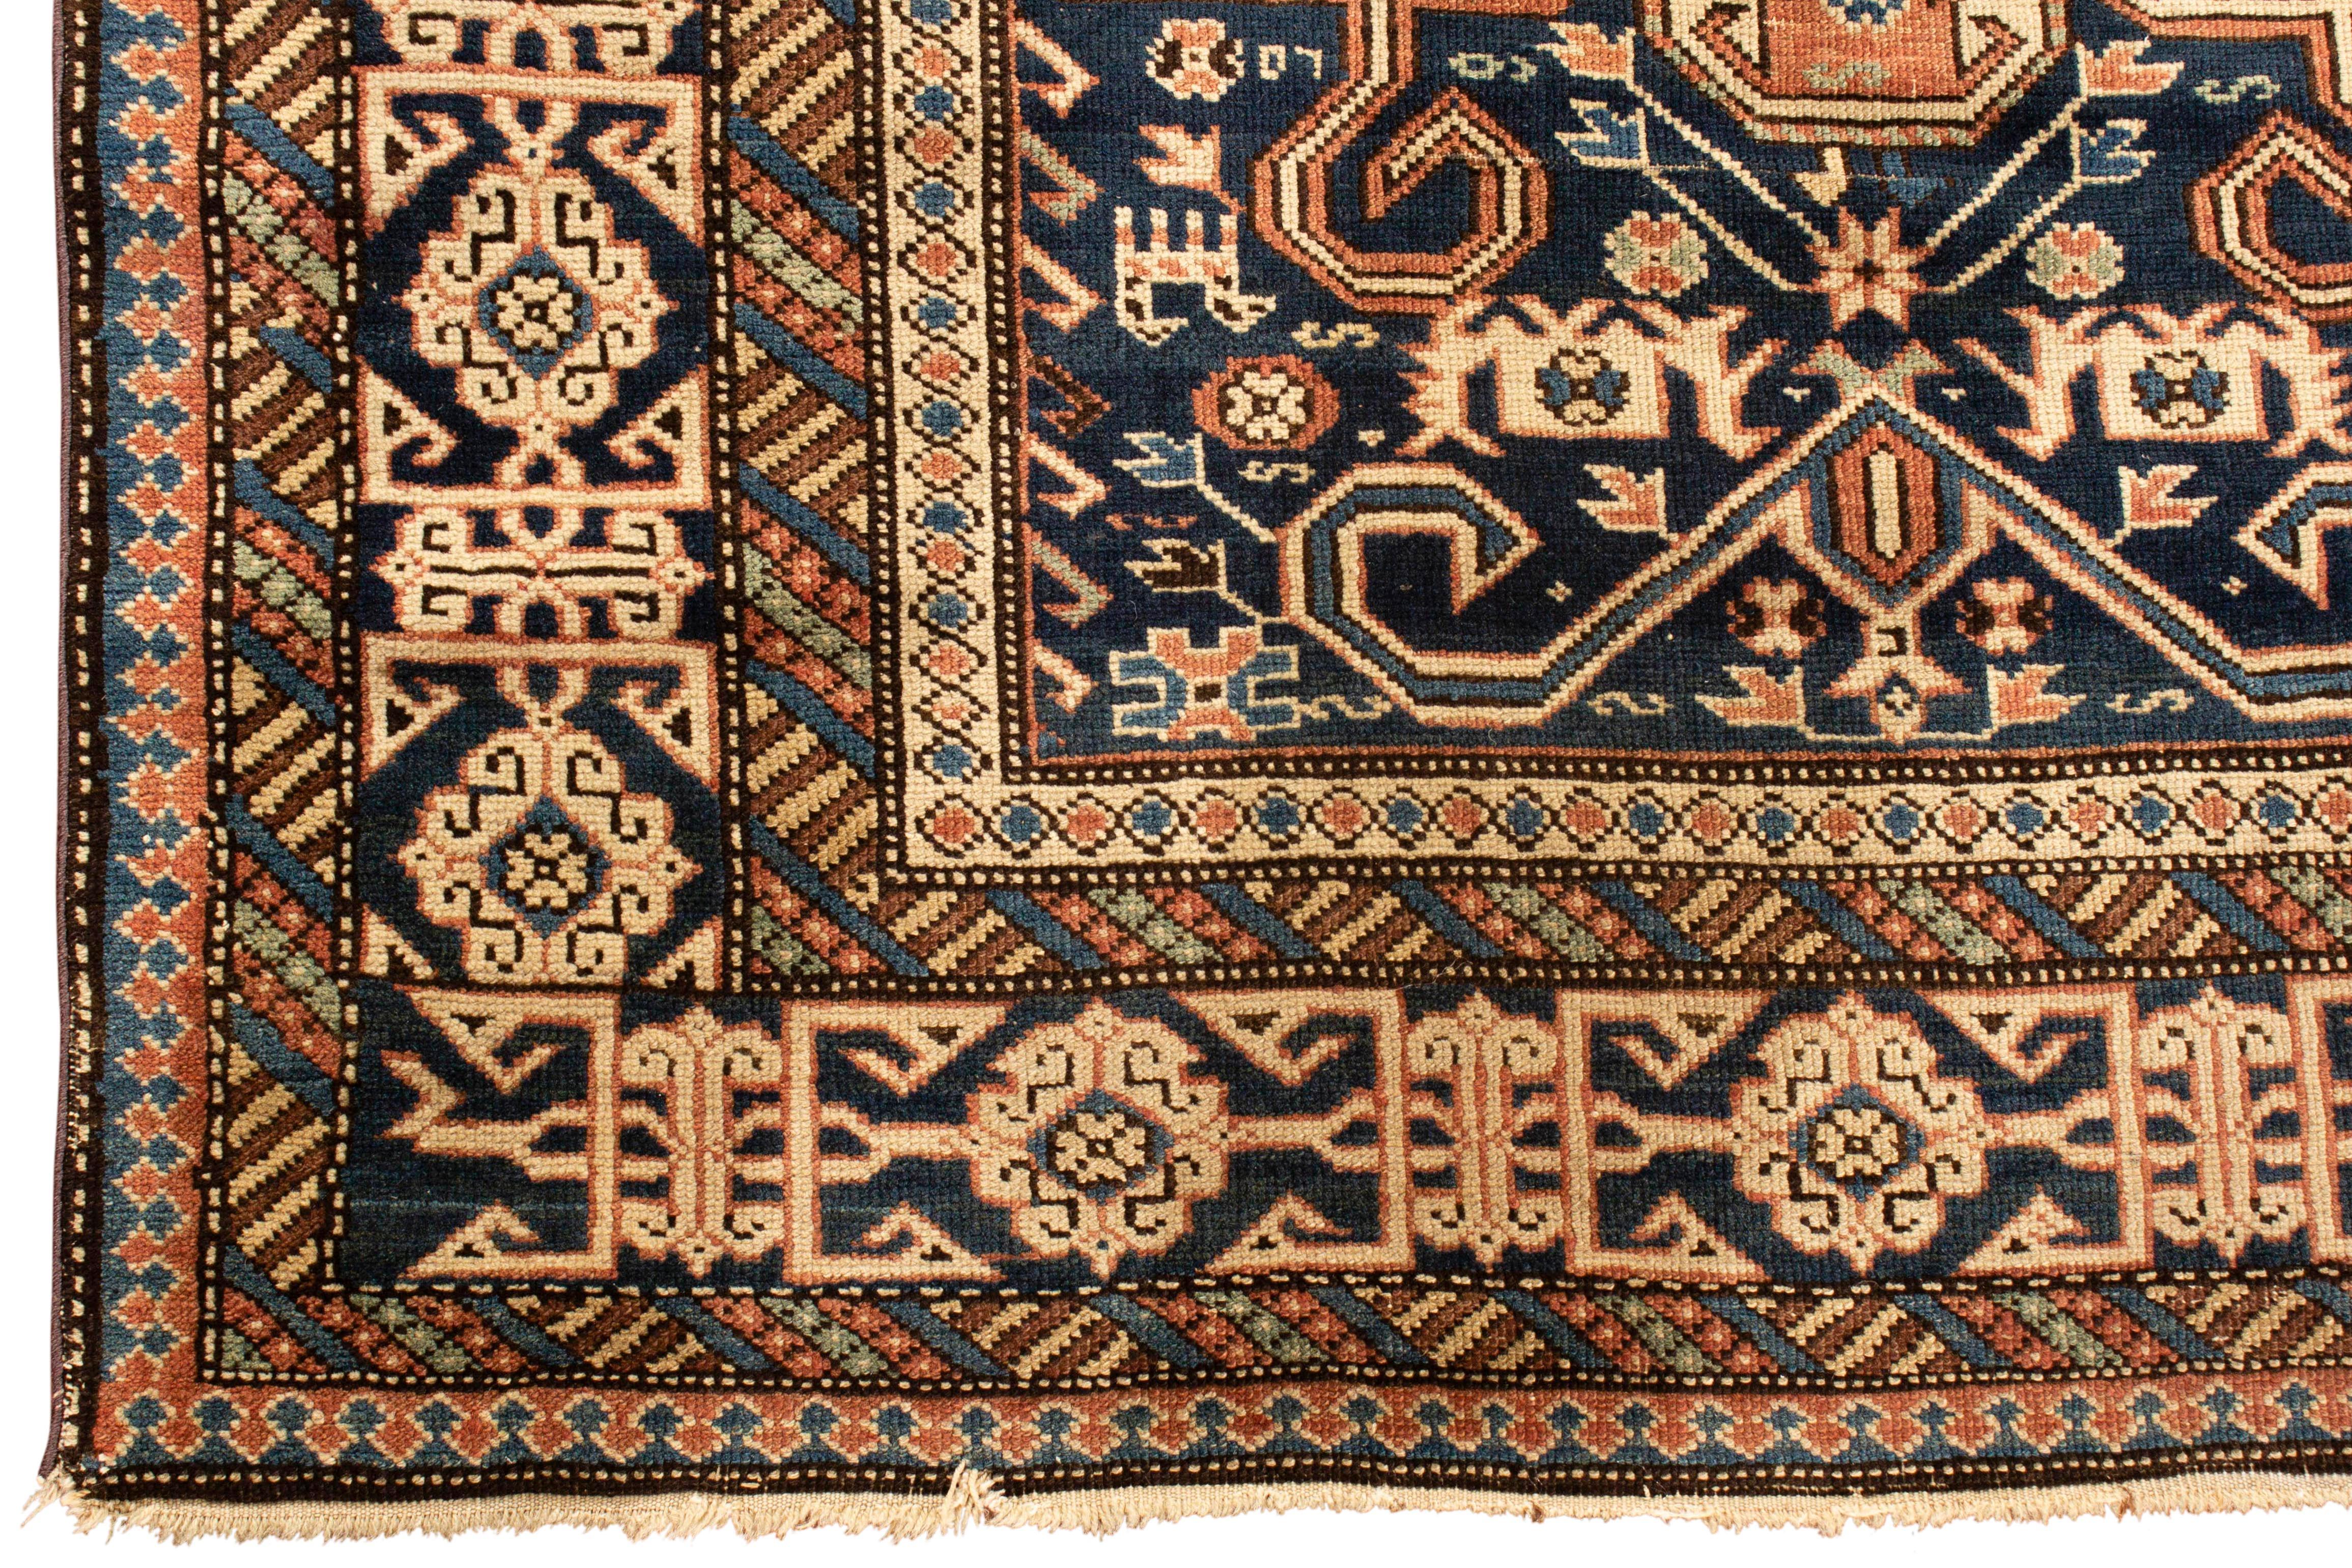 Antique Caucasian Perpedil Shirvan rug circa 1880 from the town of the same name situated to the southeast of Kuba in the Caucasian region of Daghestan. Featuring the distinctive rams horn design associated with rugs from this area on a dark blue